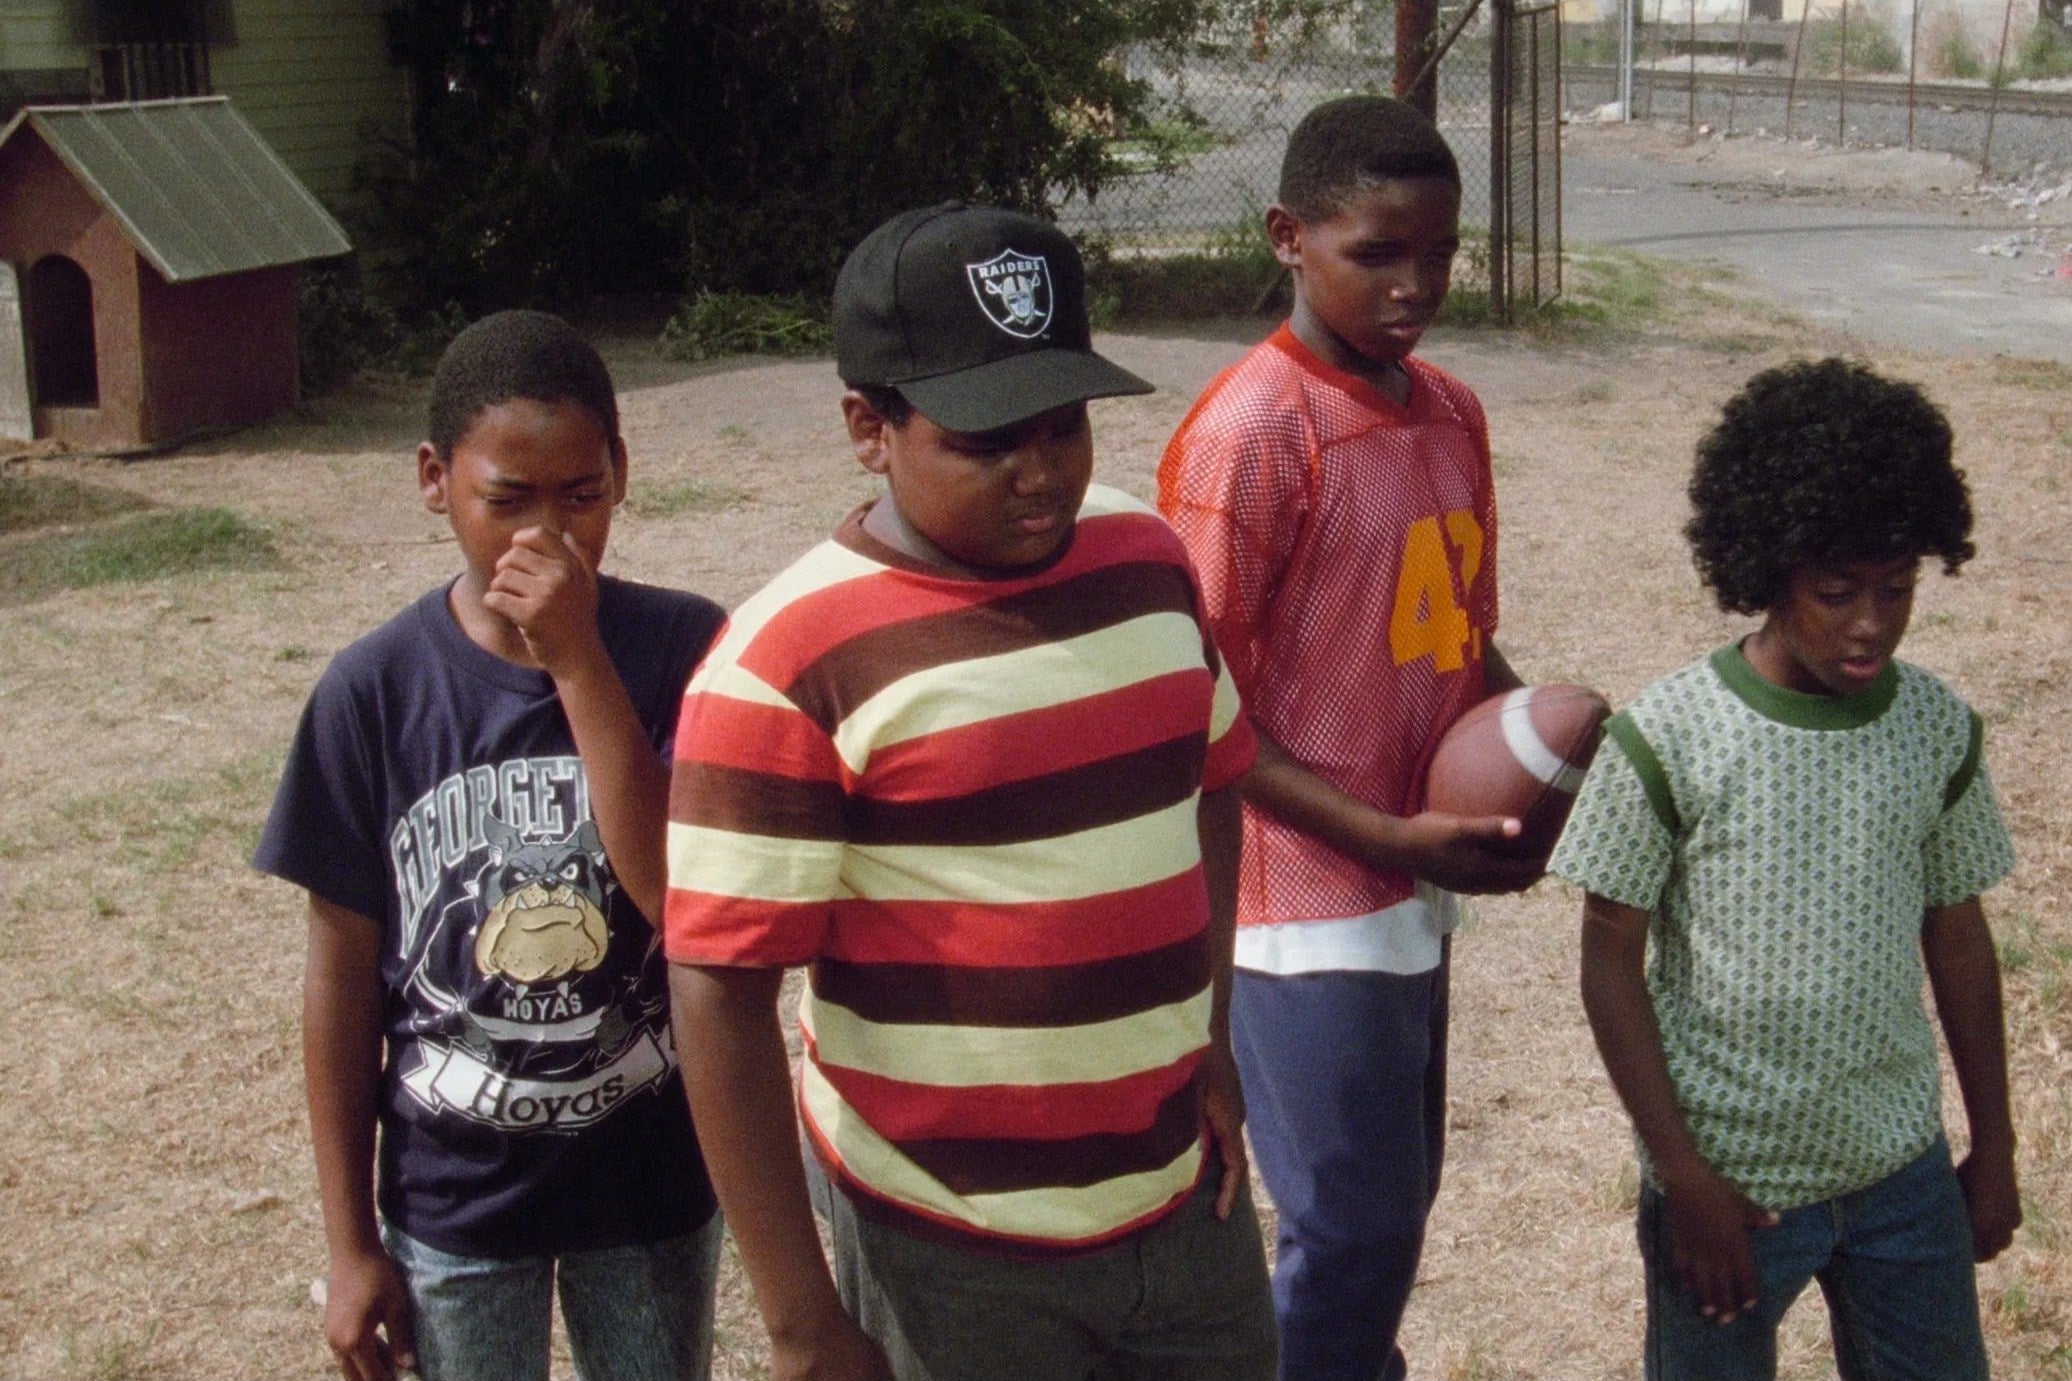 Four young boys stand while looking down at something off camera with frowns or straight faces. From left to right: Desi Arnez Hines II holds his nose, Baha Jackson sports a frown, Donovan McCrary looks down while holding a football, and Kenneth A. Brown looks down.